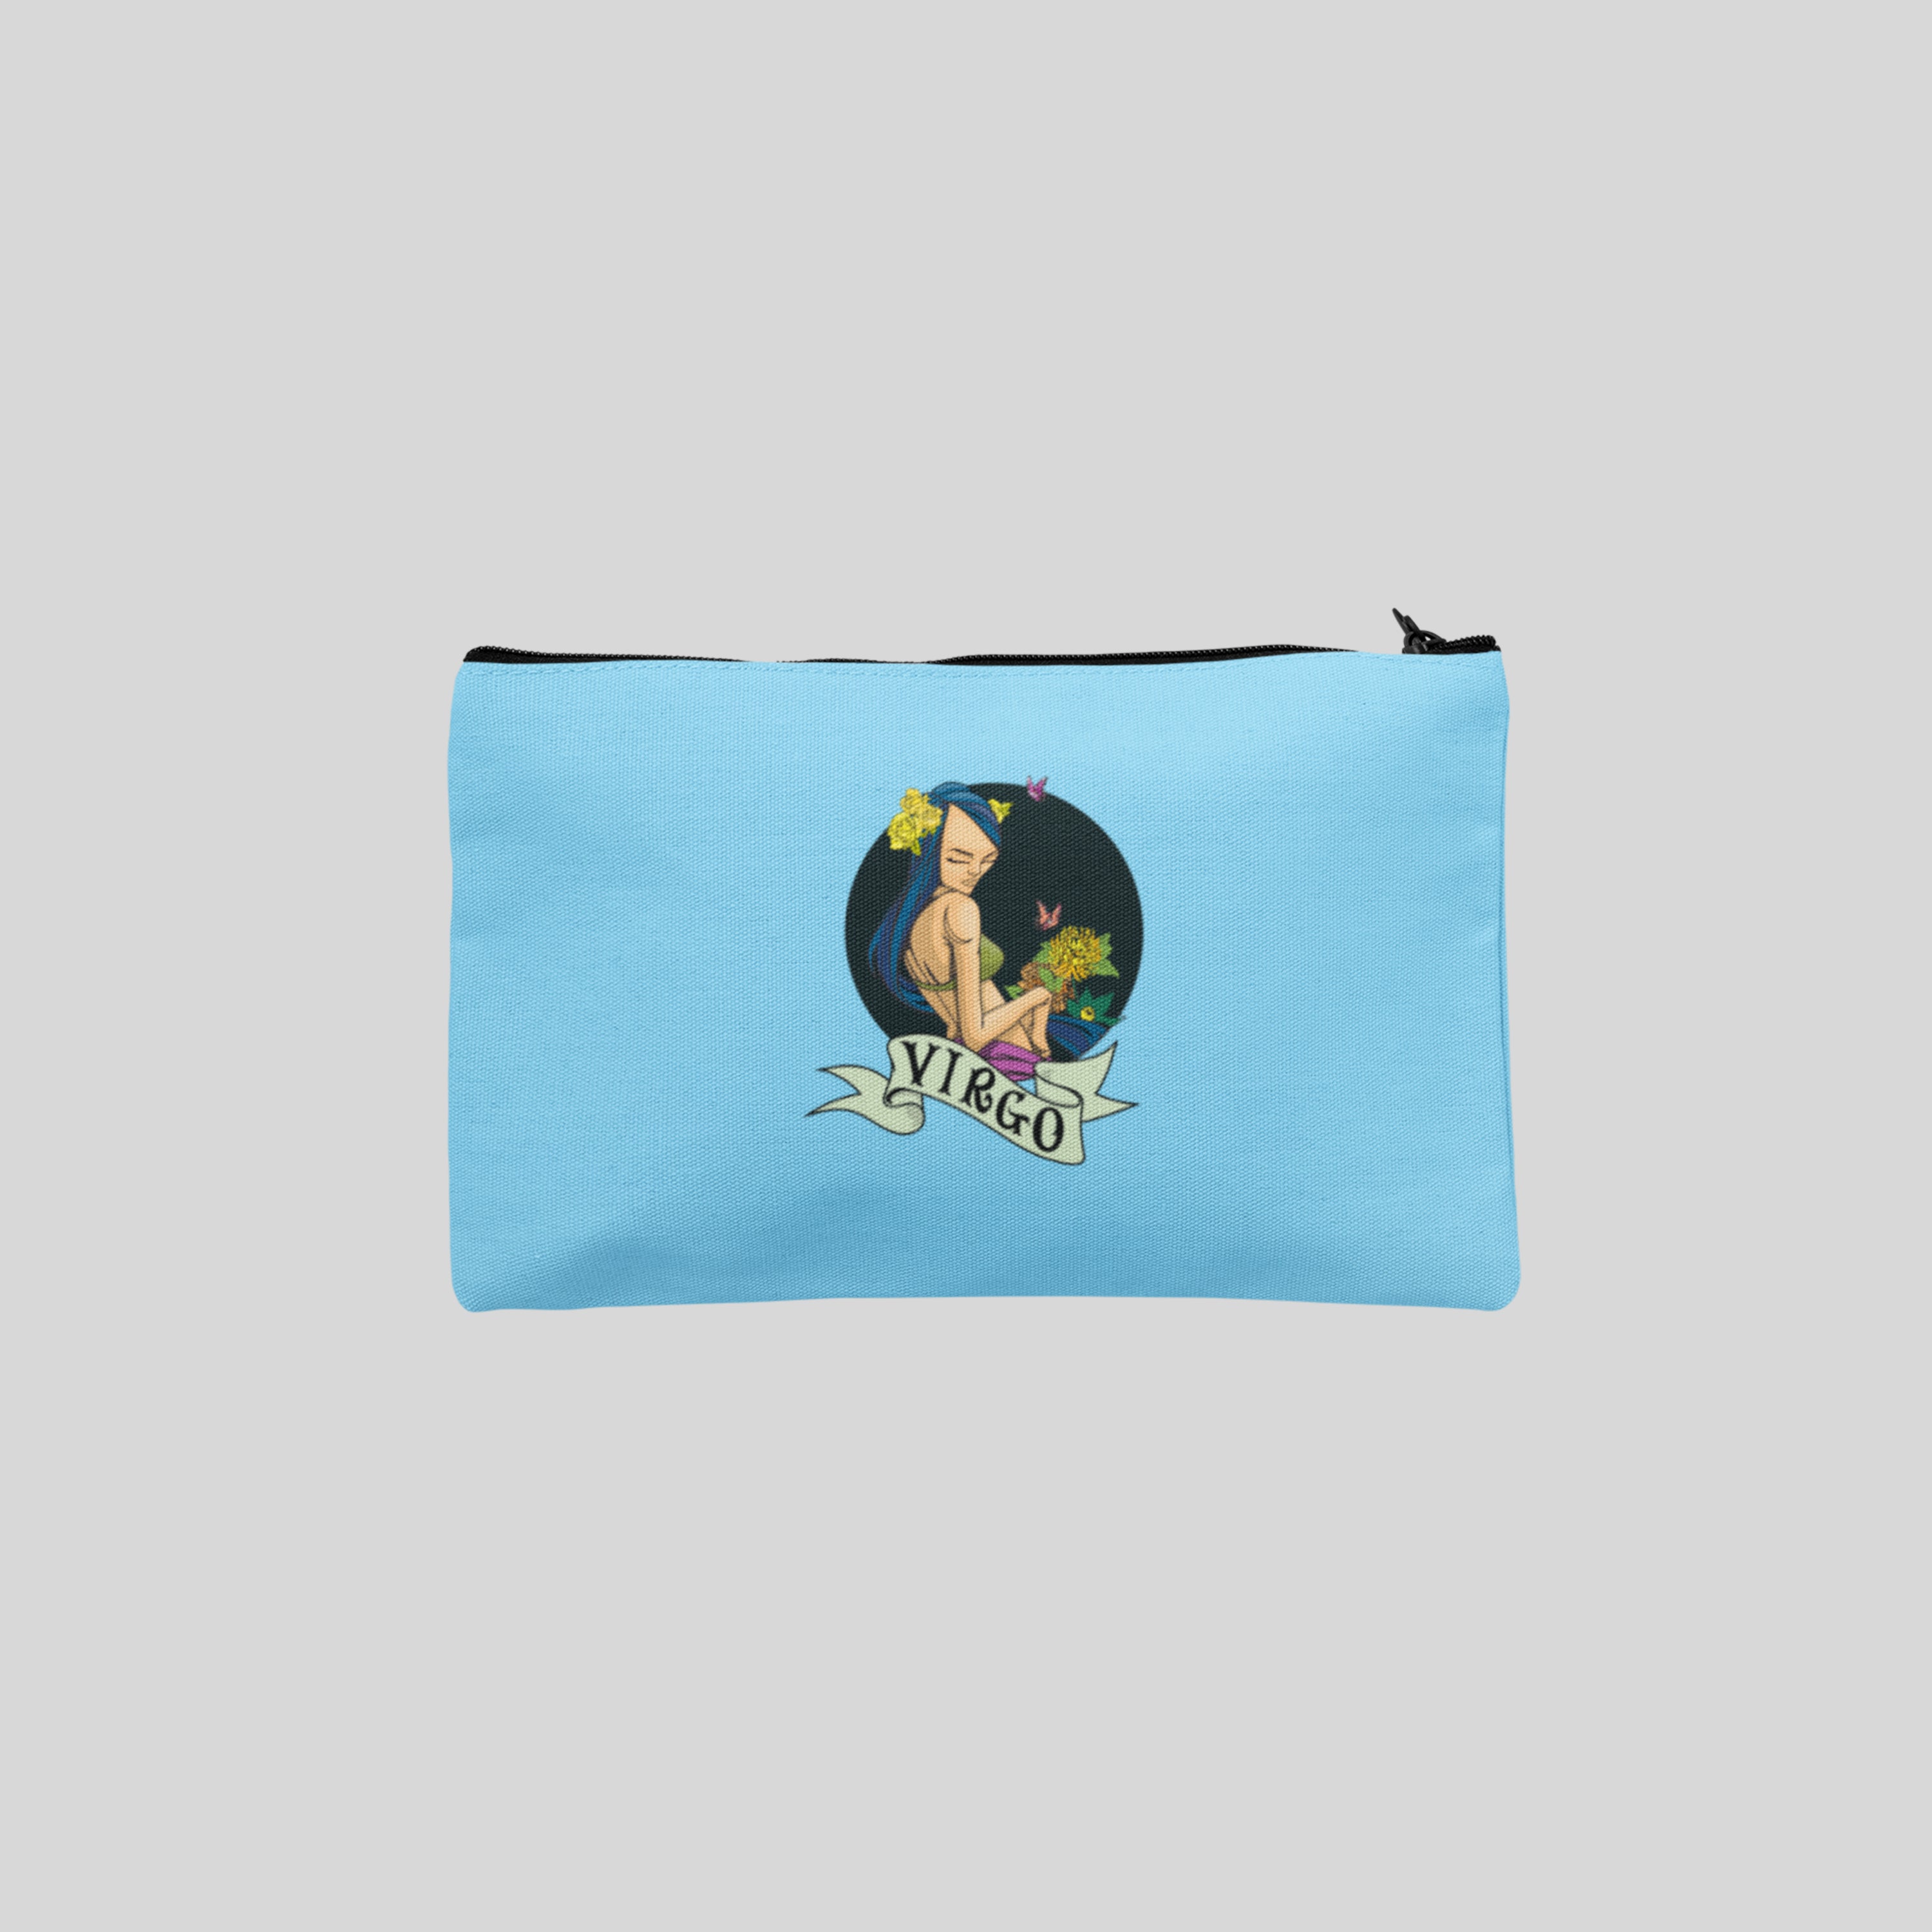 VIRGO BY SAM FLORES ACCESSORY POUCH